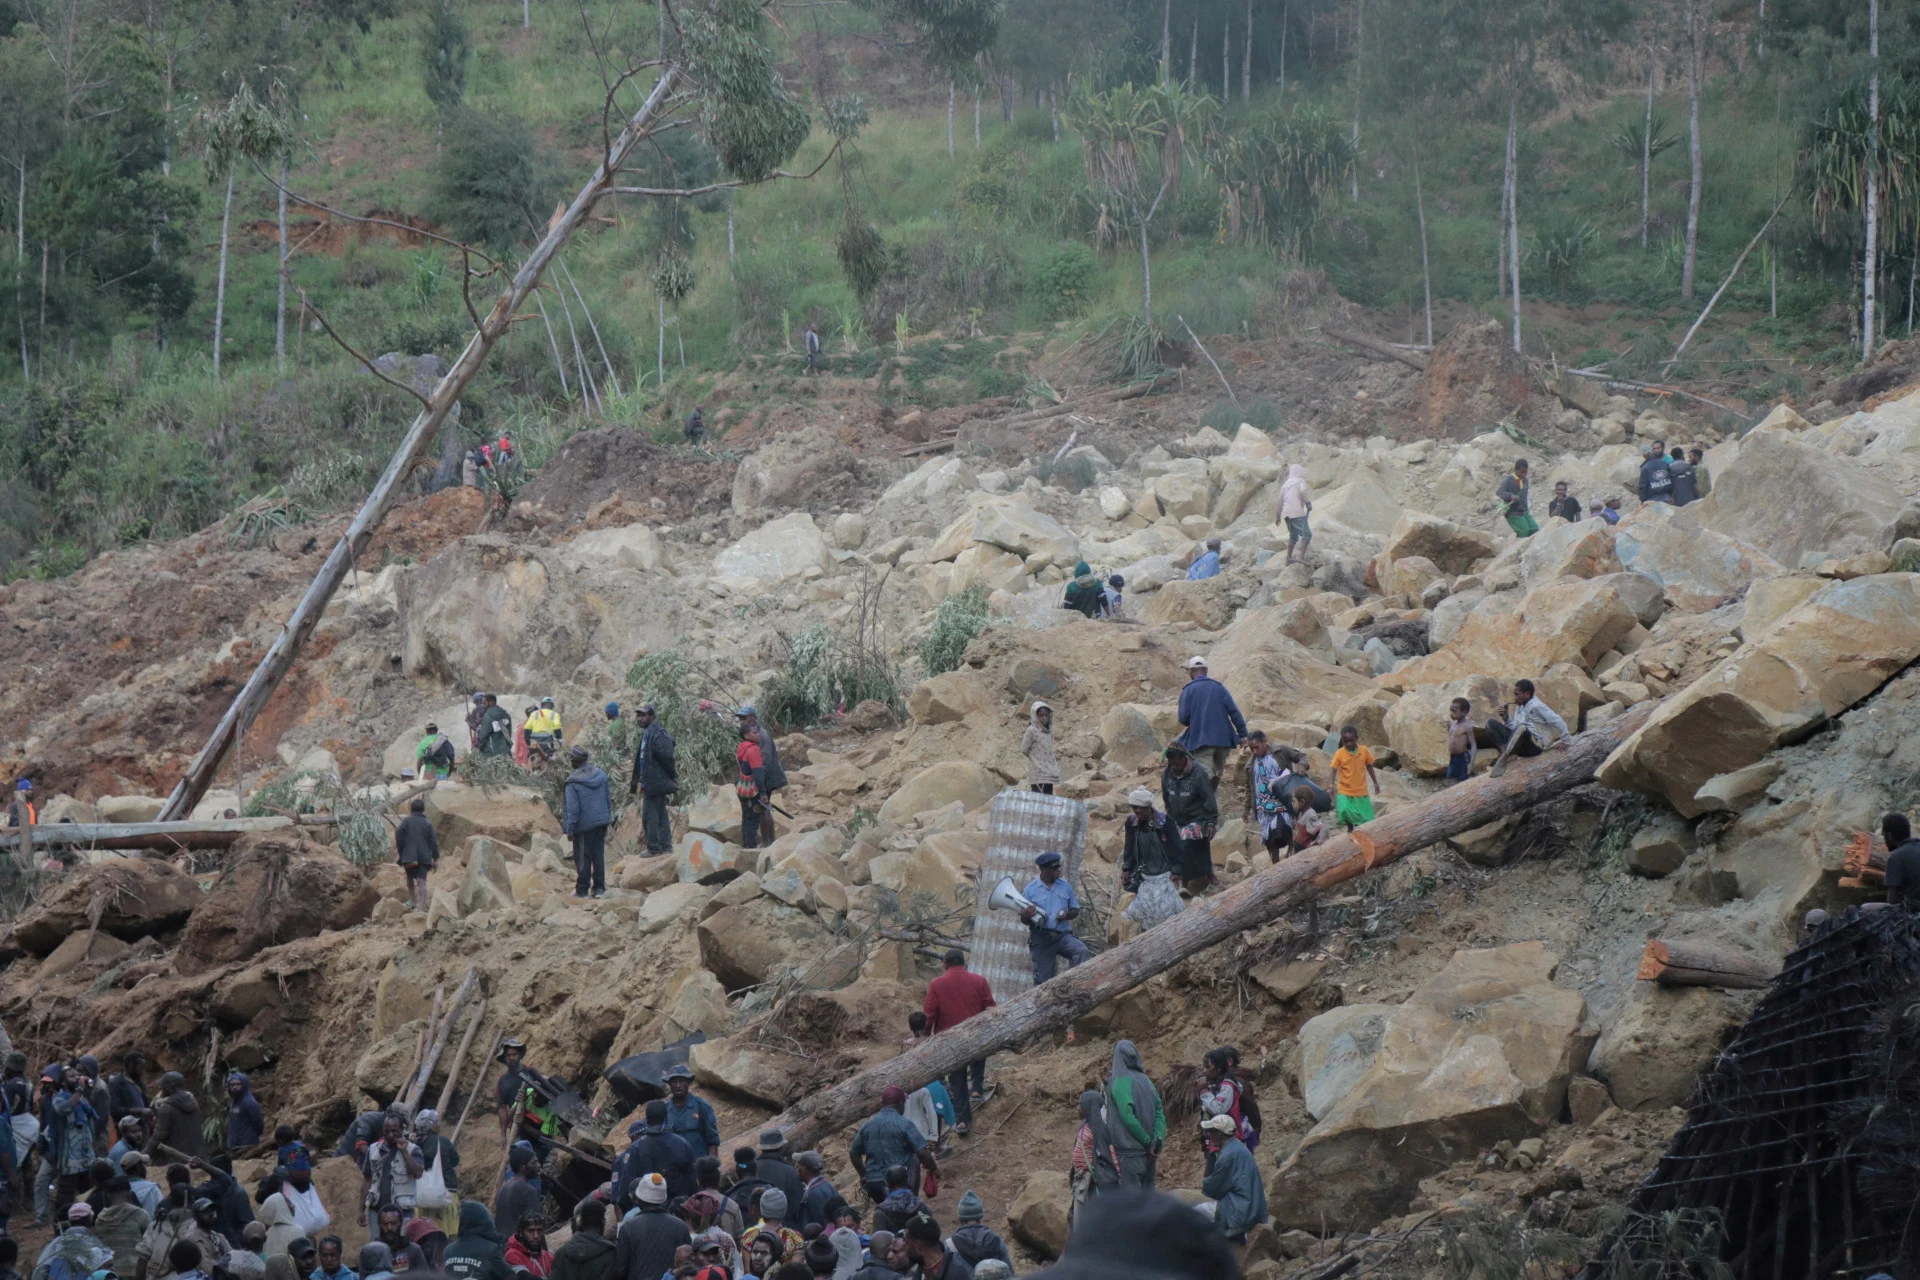 More than 2000 people buried in Papua New Guinea landslide, government says 